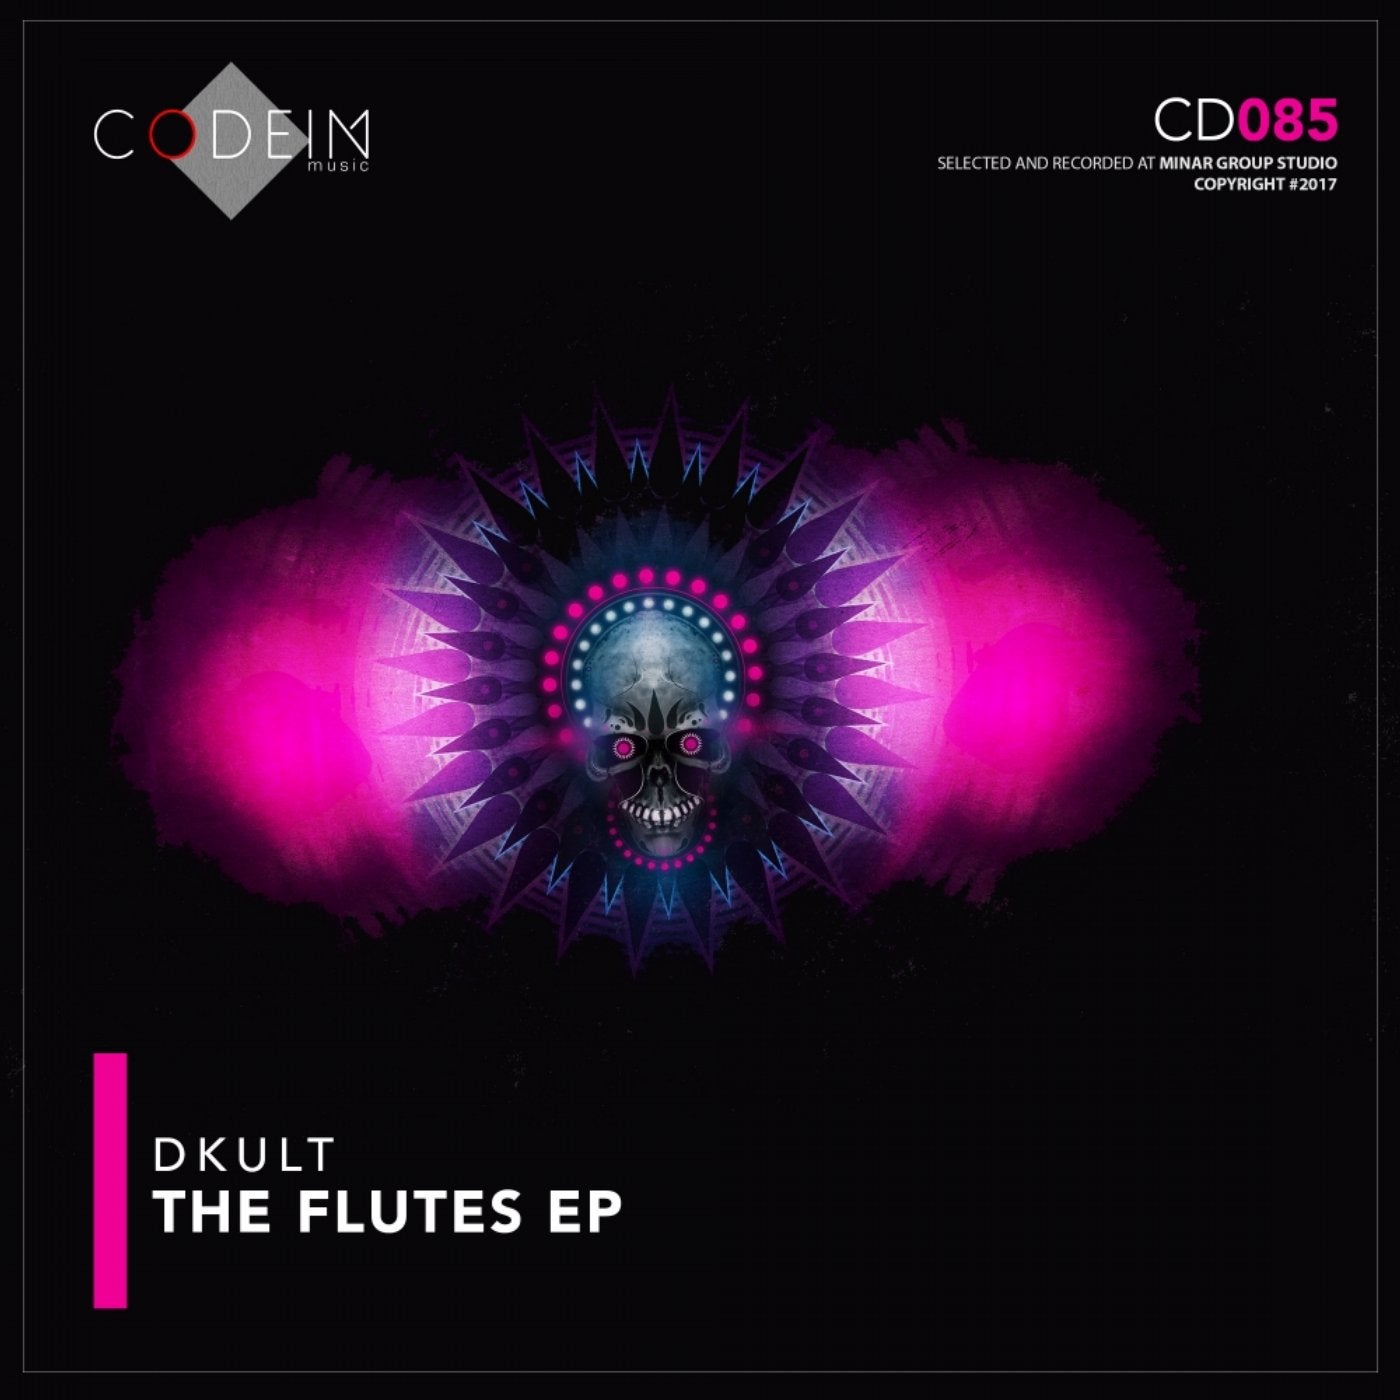 The Flutes EP